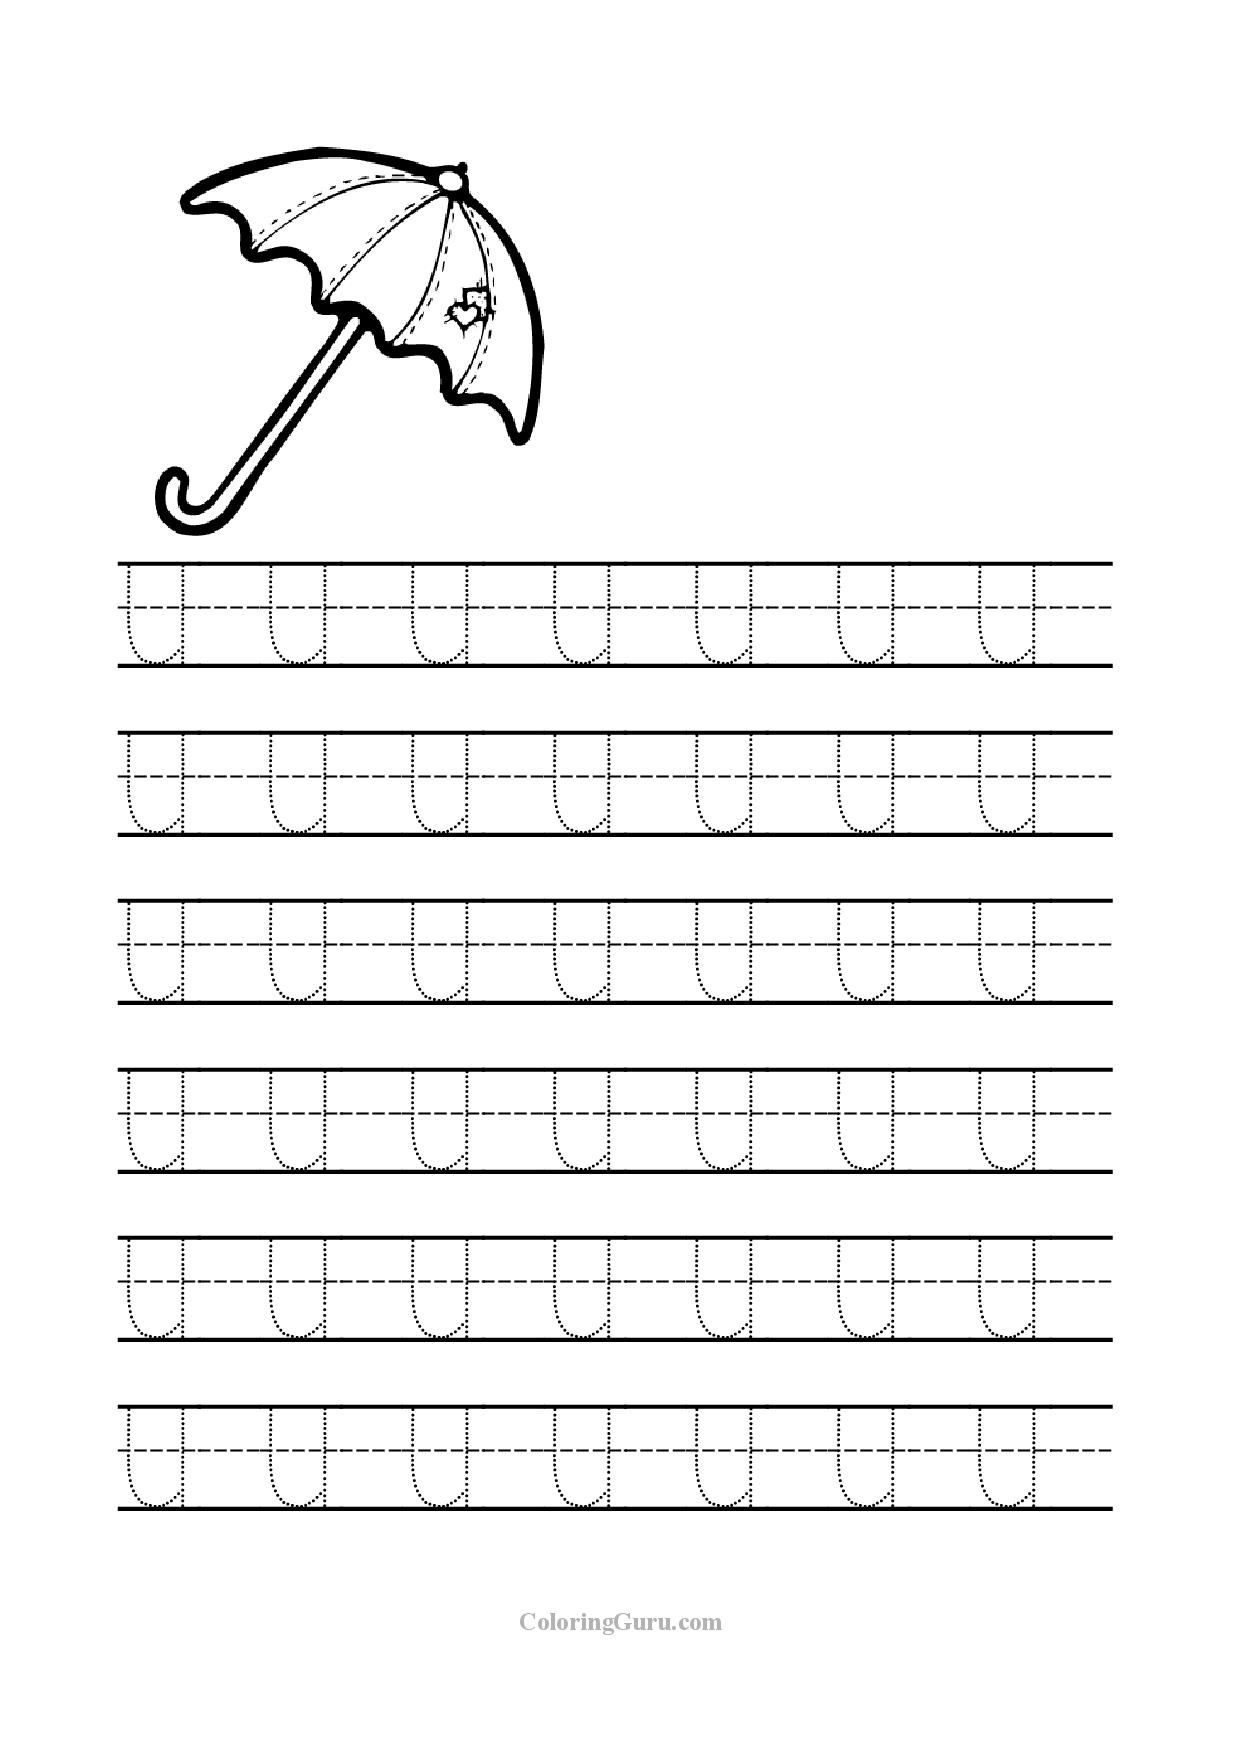 Free Printable Tracing Letter U Worksheets For Preschool Tracing 